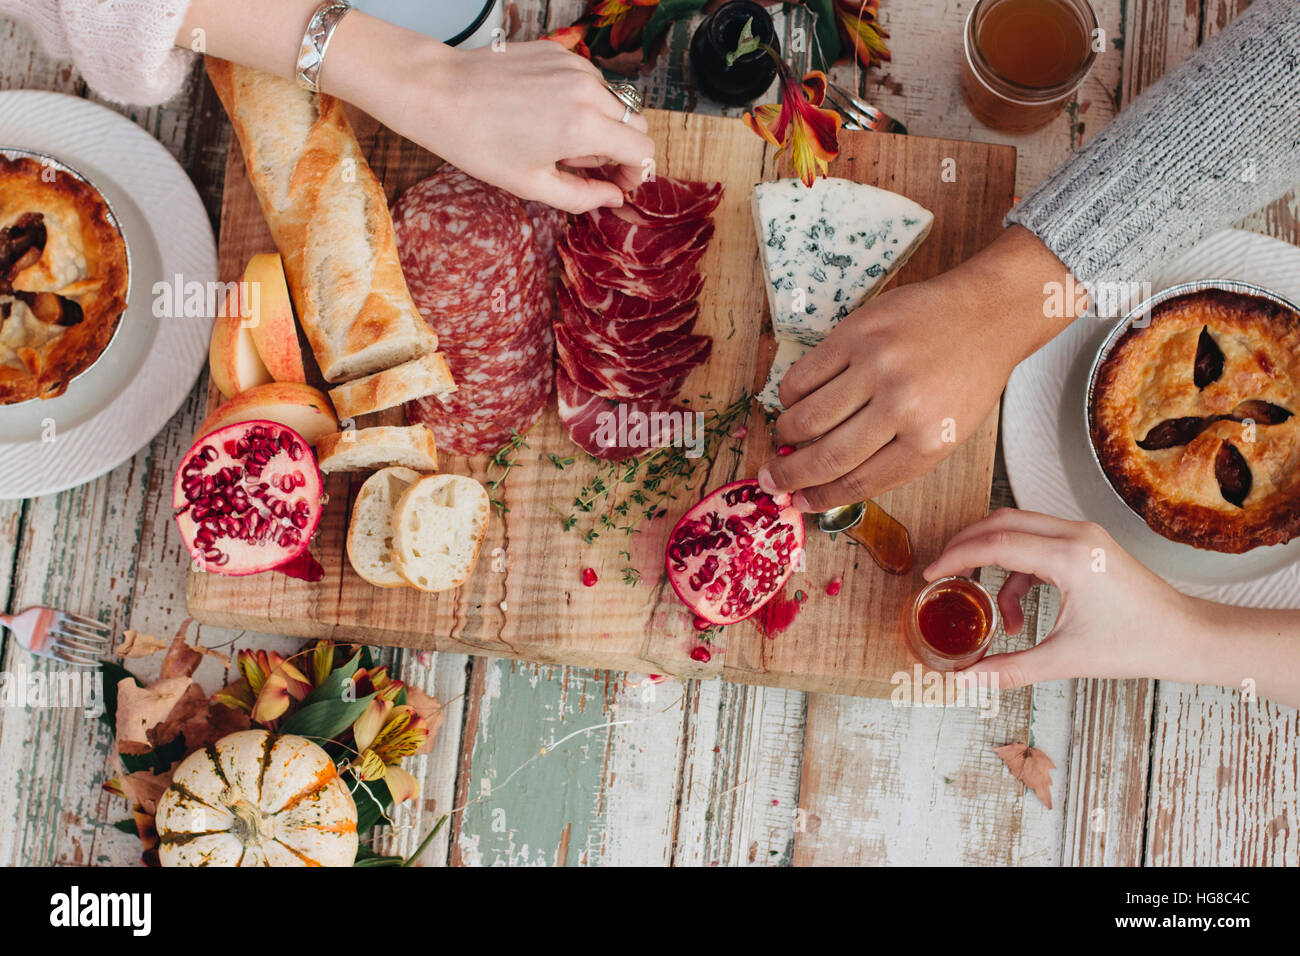 Overhead view of hands taking food on table Stock Photo